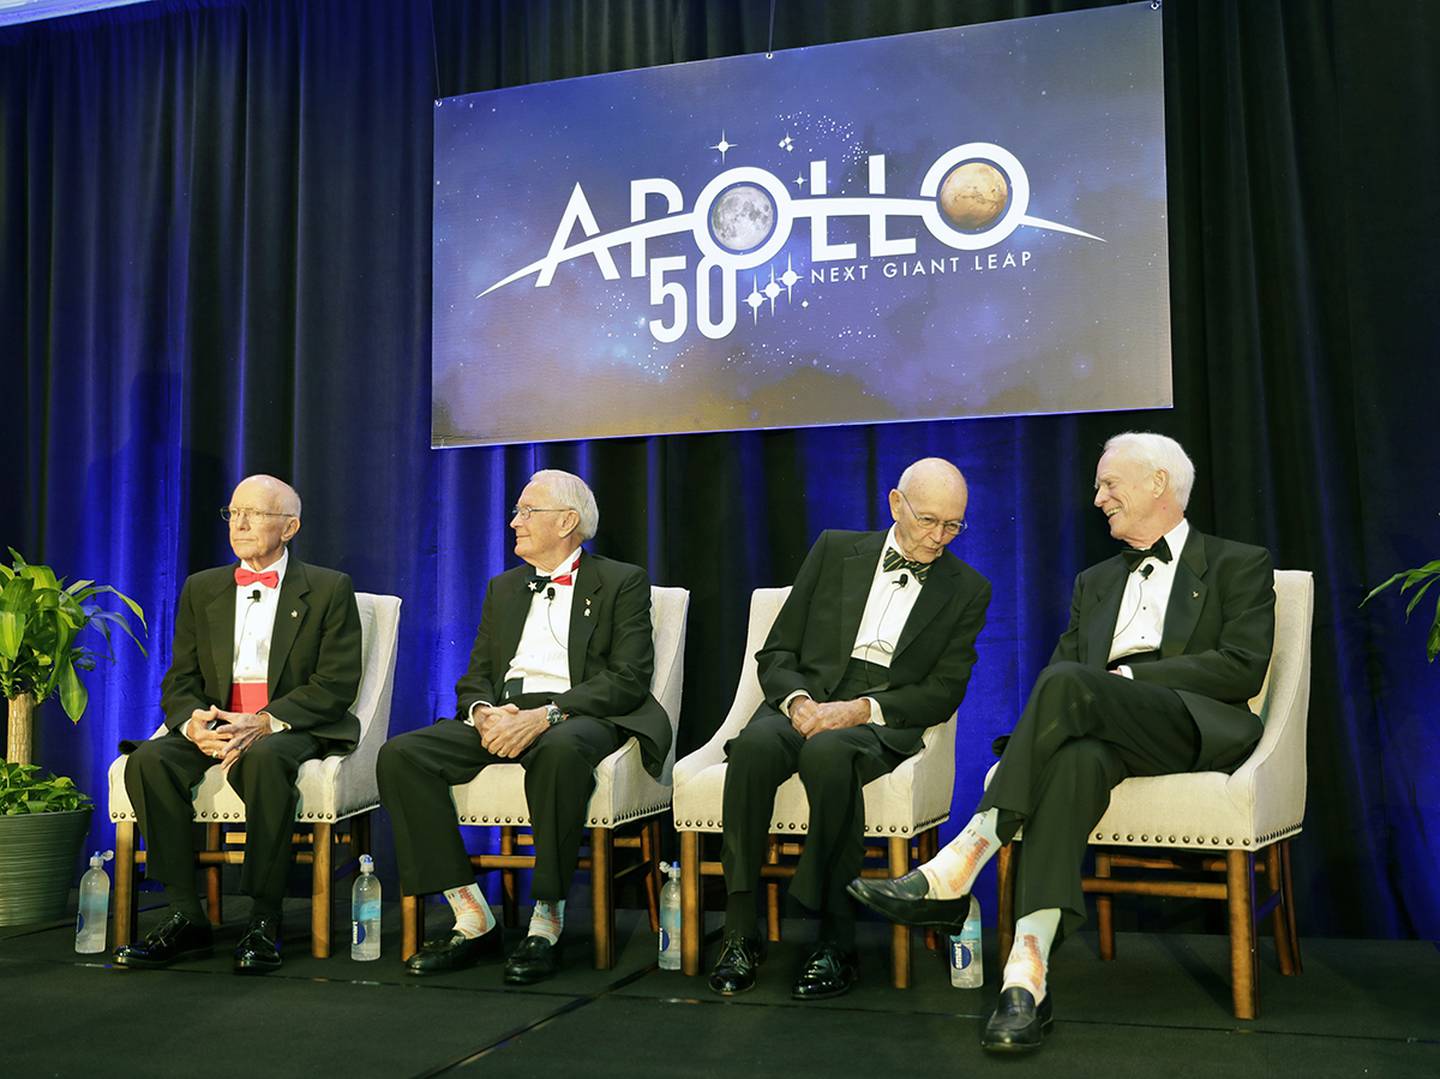 Apollo Legends attend a news conference from left, Gerry Griffin, Apollo flight director, and Charlie Duke, Apollo 16 astronaut, take their seats as Mike Collins, Apollo 11 astronaut admires Apollo 9 astronaut Rusty Schweickart's socks featuring a Saturn V rocket, during a news conference Tuesday, July 16, 2019, in Cocoa Beach, Fla.